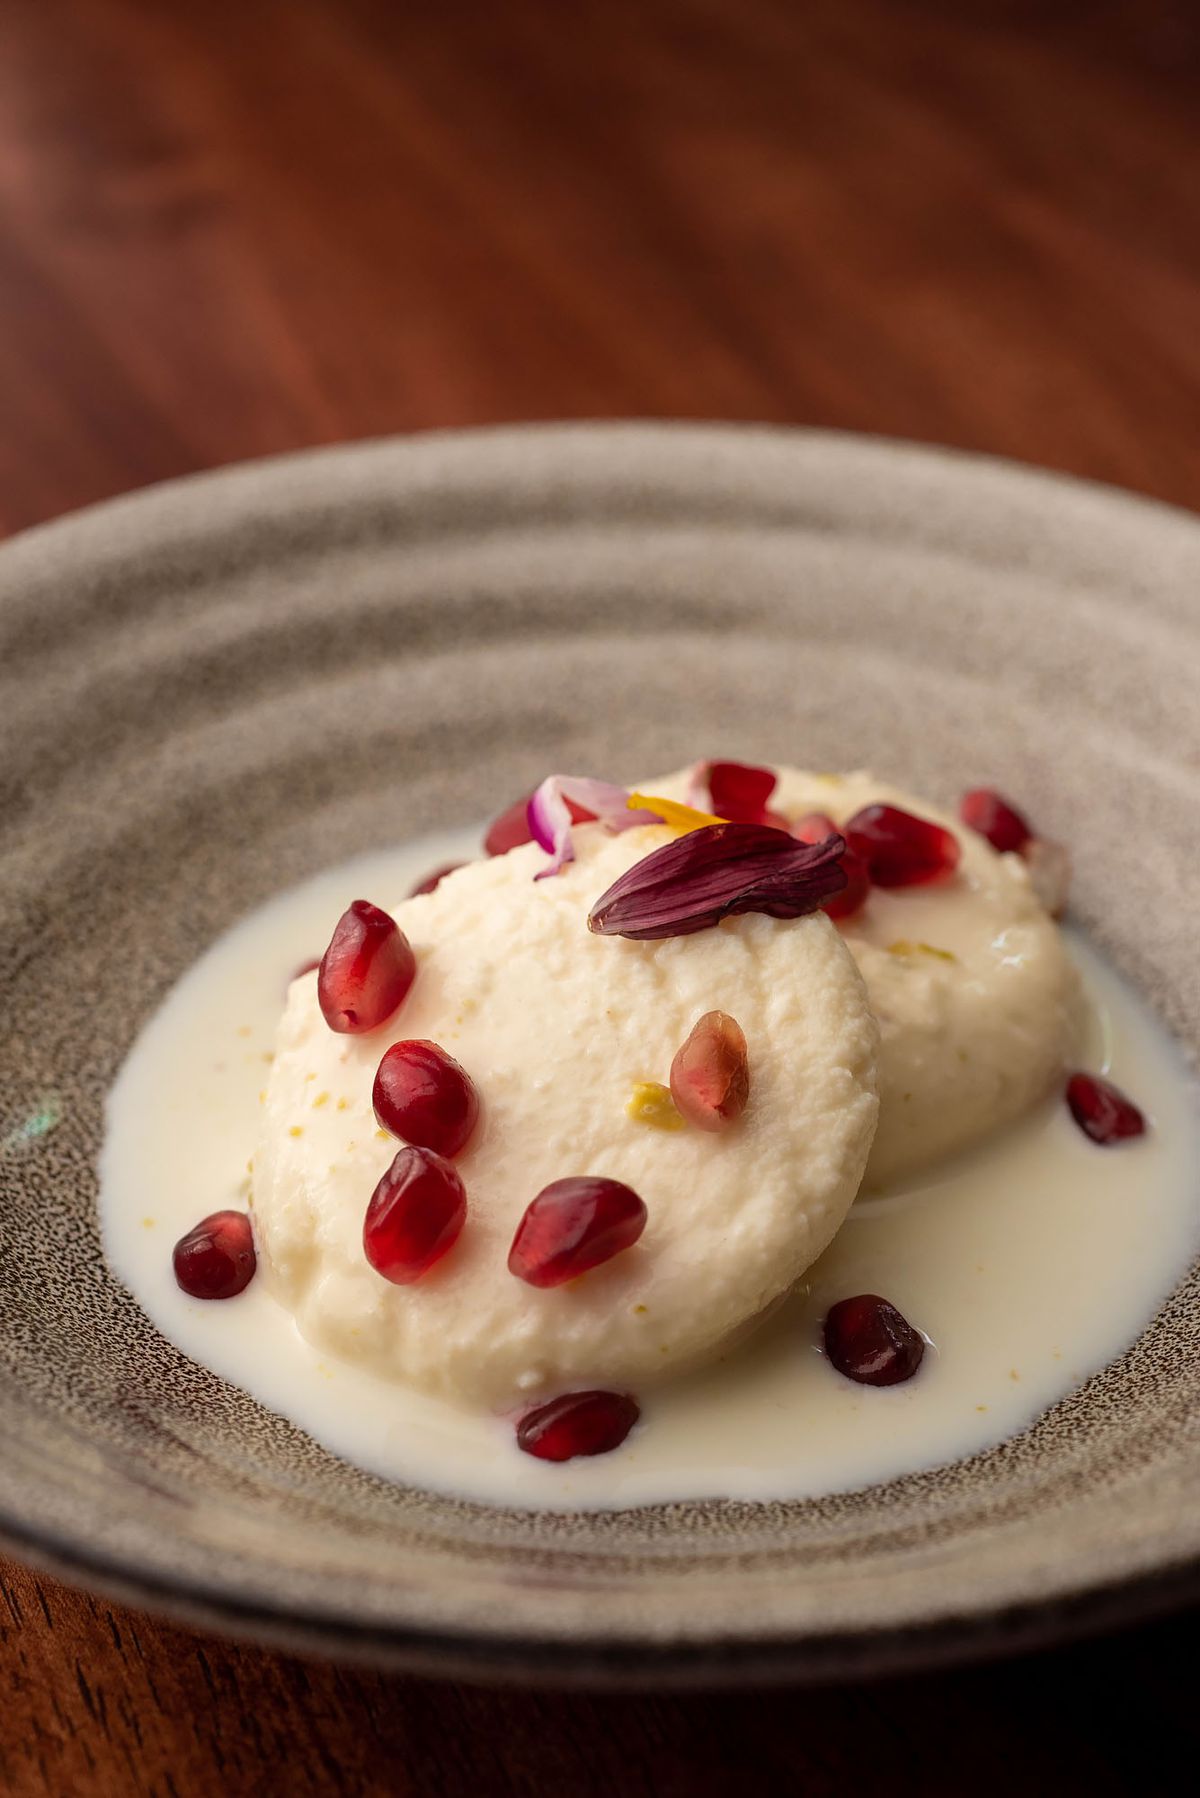 Small white cakes with pomegranate for dessert.